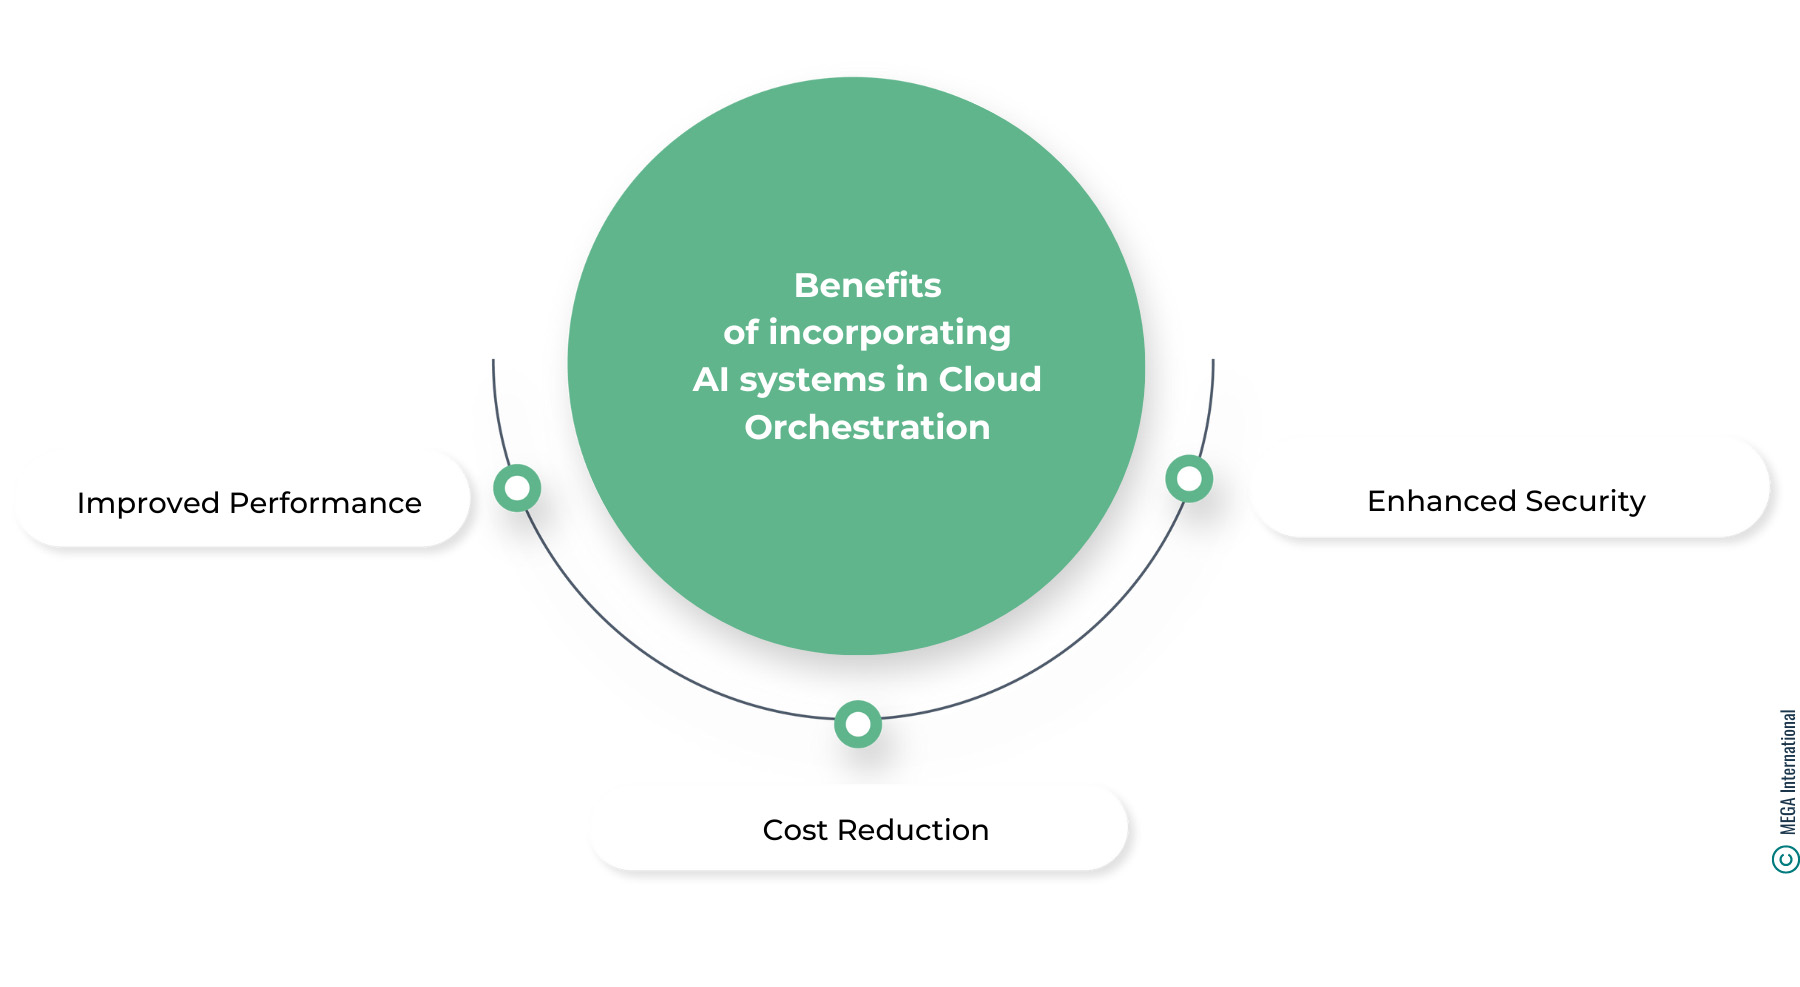 Benefits of incorporating AI Systems in Cloud orchestration